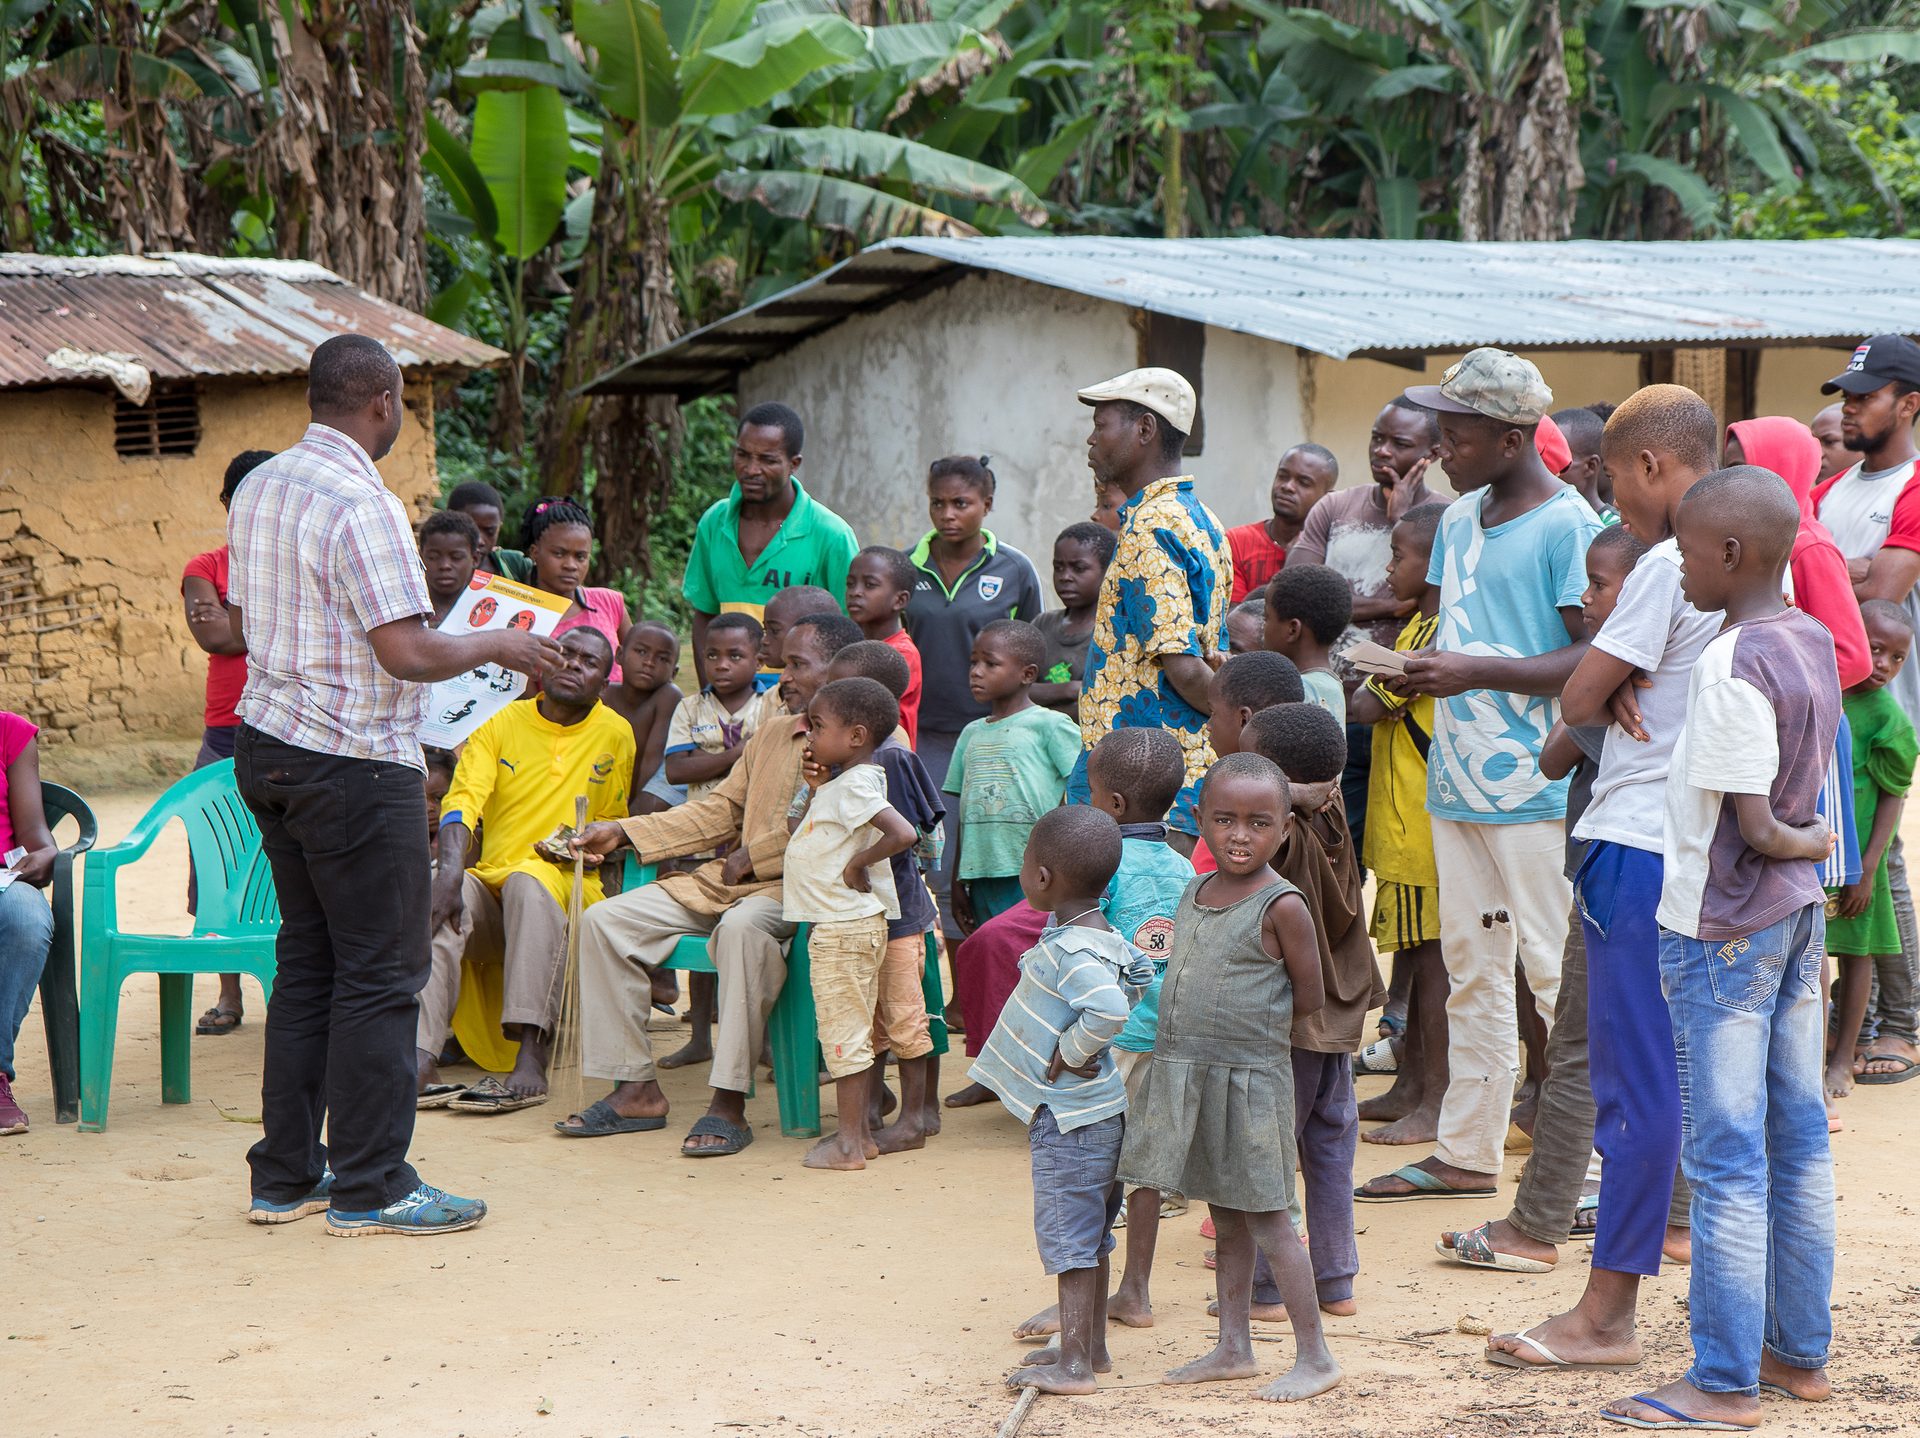 A member of the EBO-SURSY Project explains disease transmission patterns to communities in Gabon.